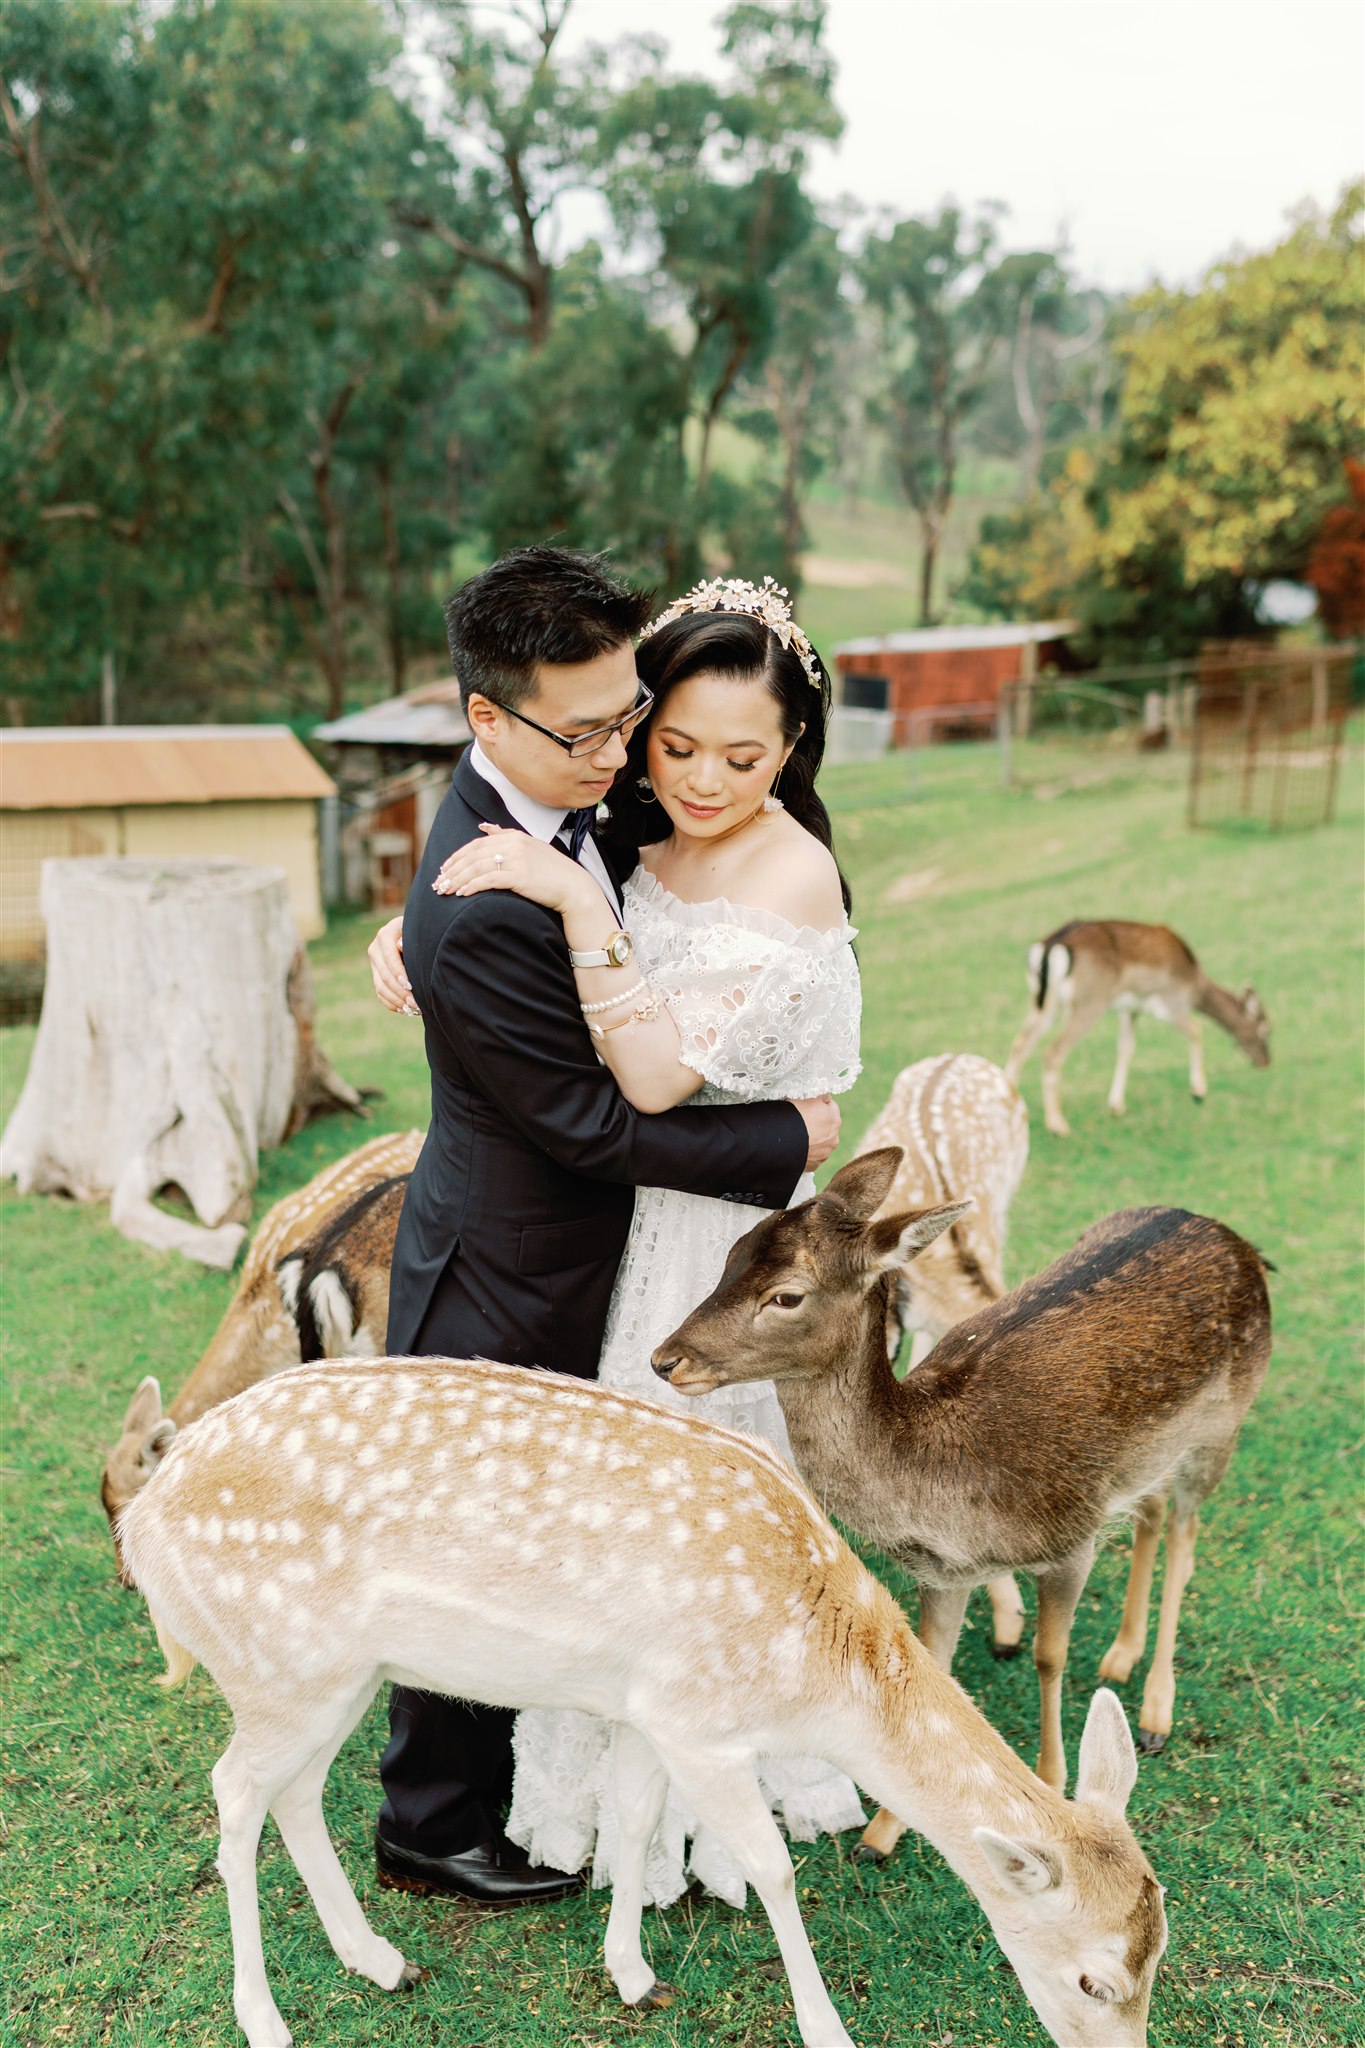 Pre wedding photo shoot with engaged couple embracing with deer at Gum Gully Farm in Silvan